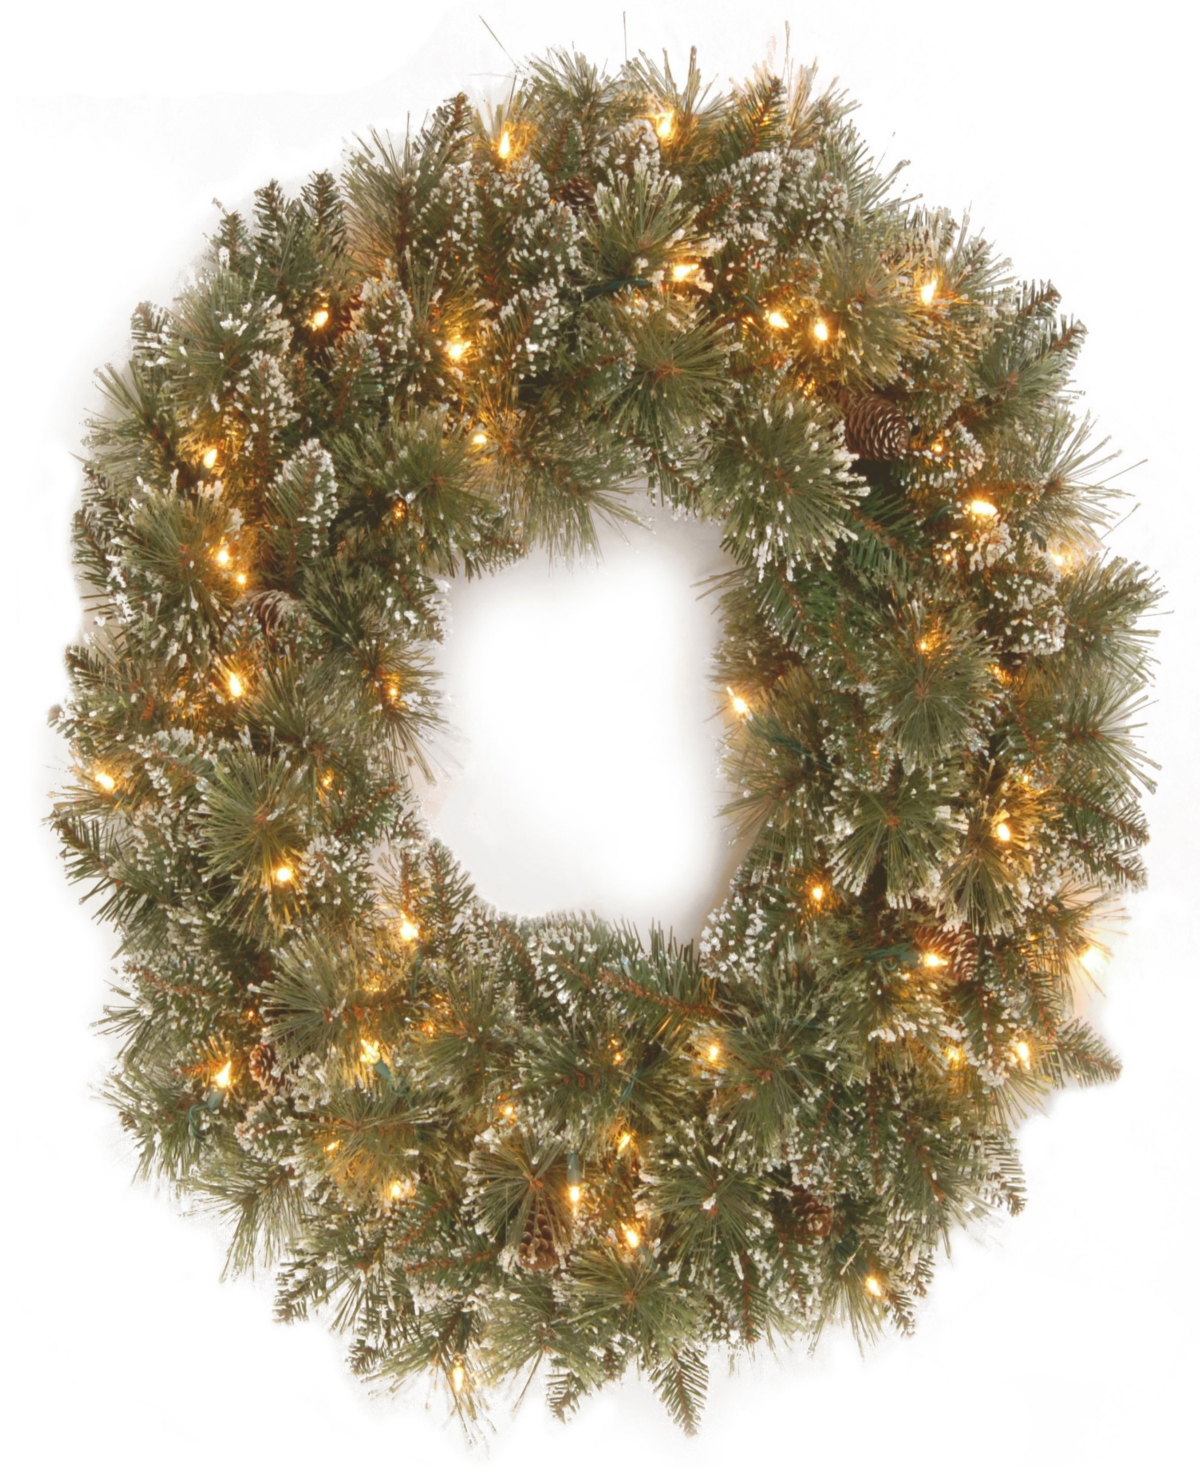 NATIONAL TREE COMPANY 30" GLITTERY BRISTLE PINE WREATH WITH TWINKLY LED LIGHTS